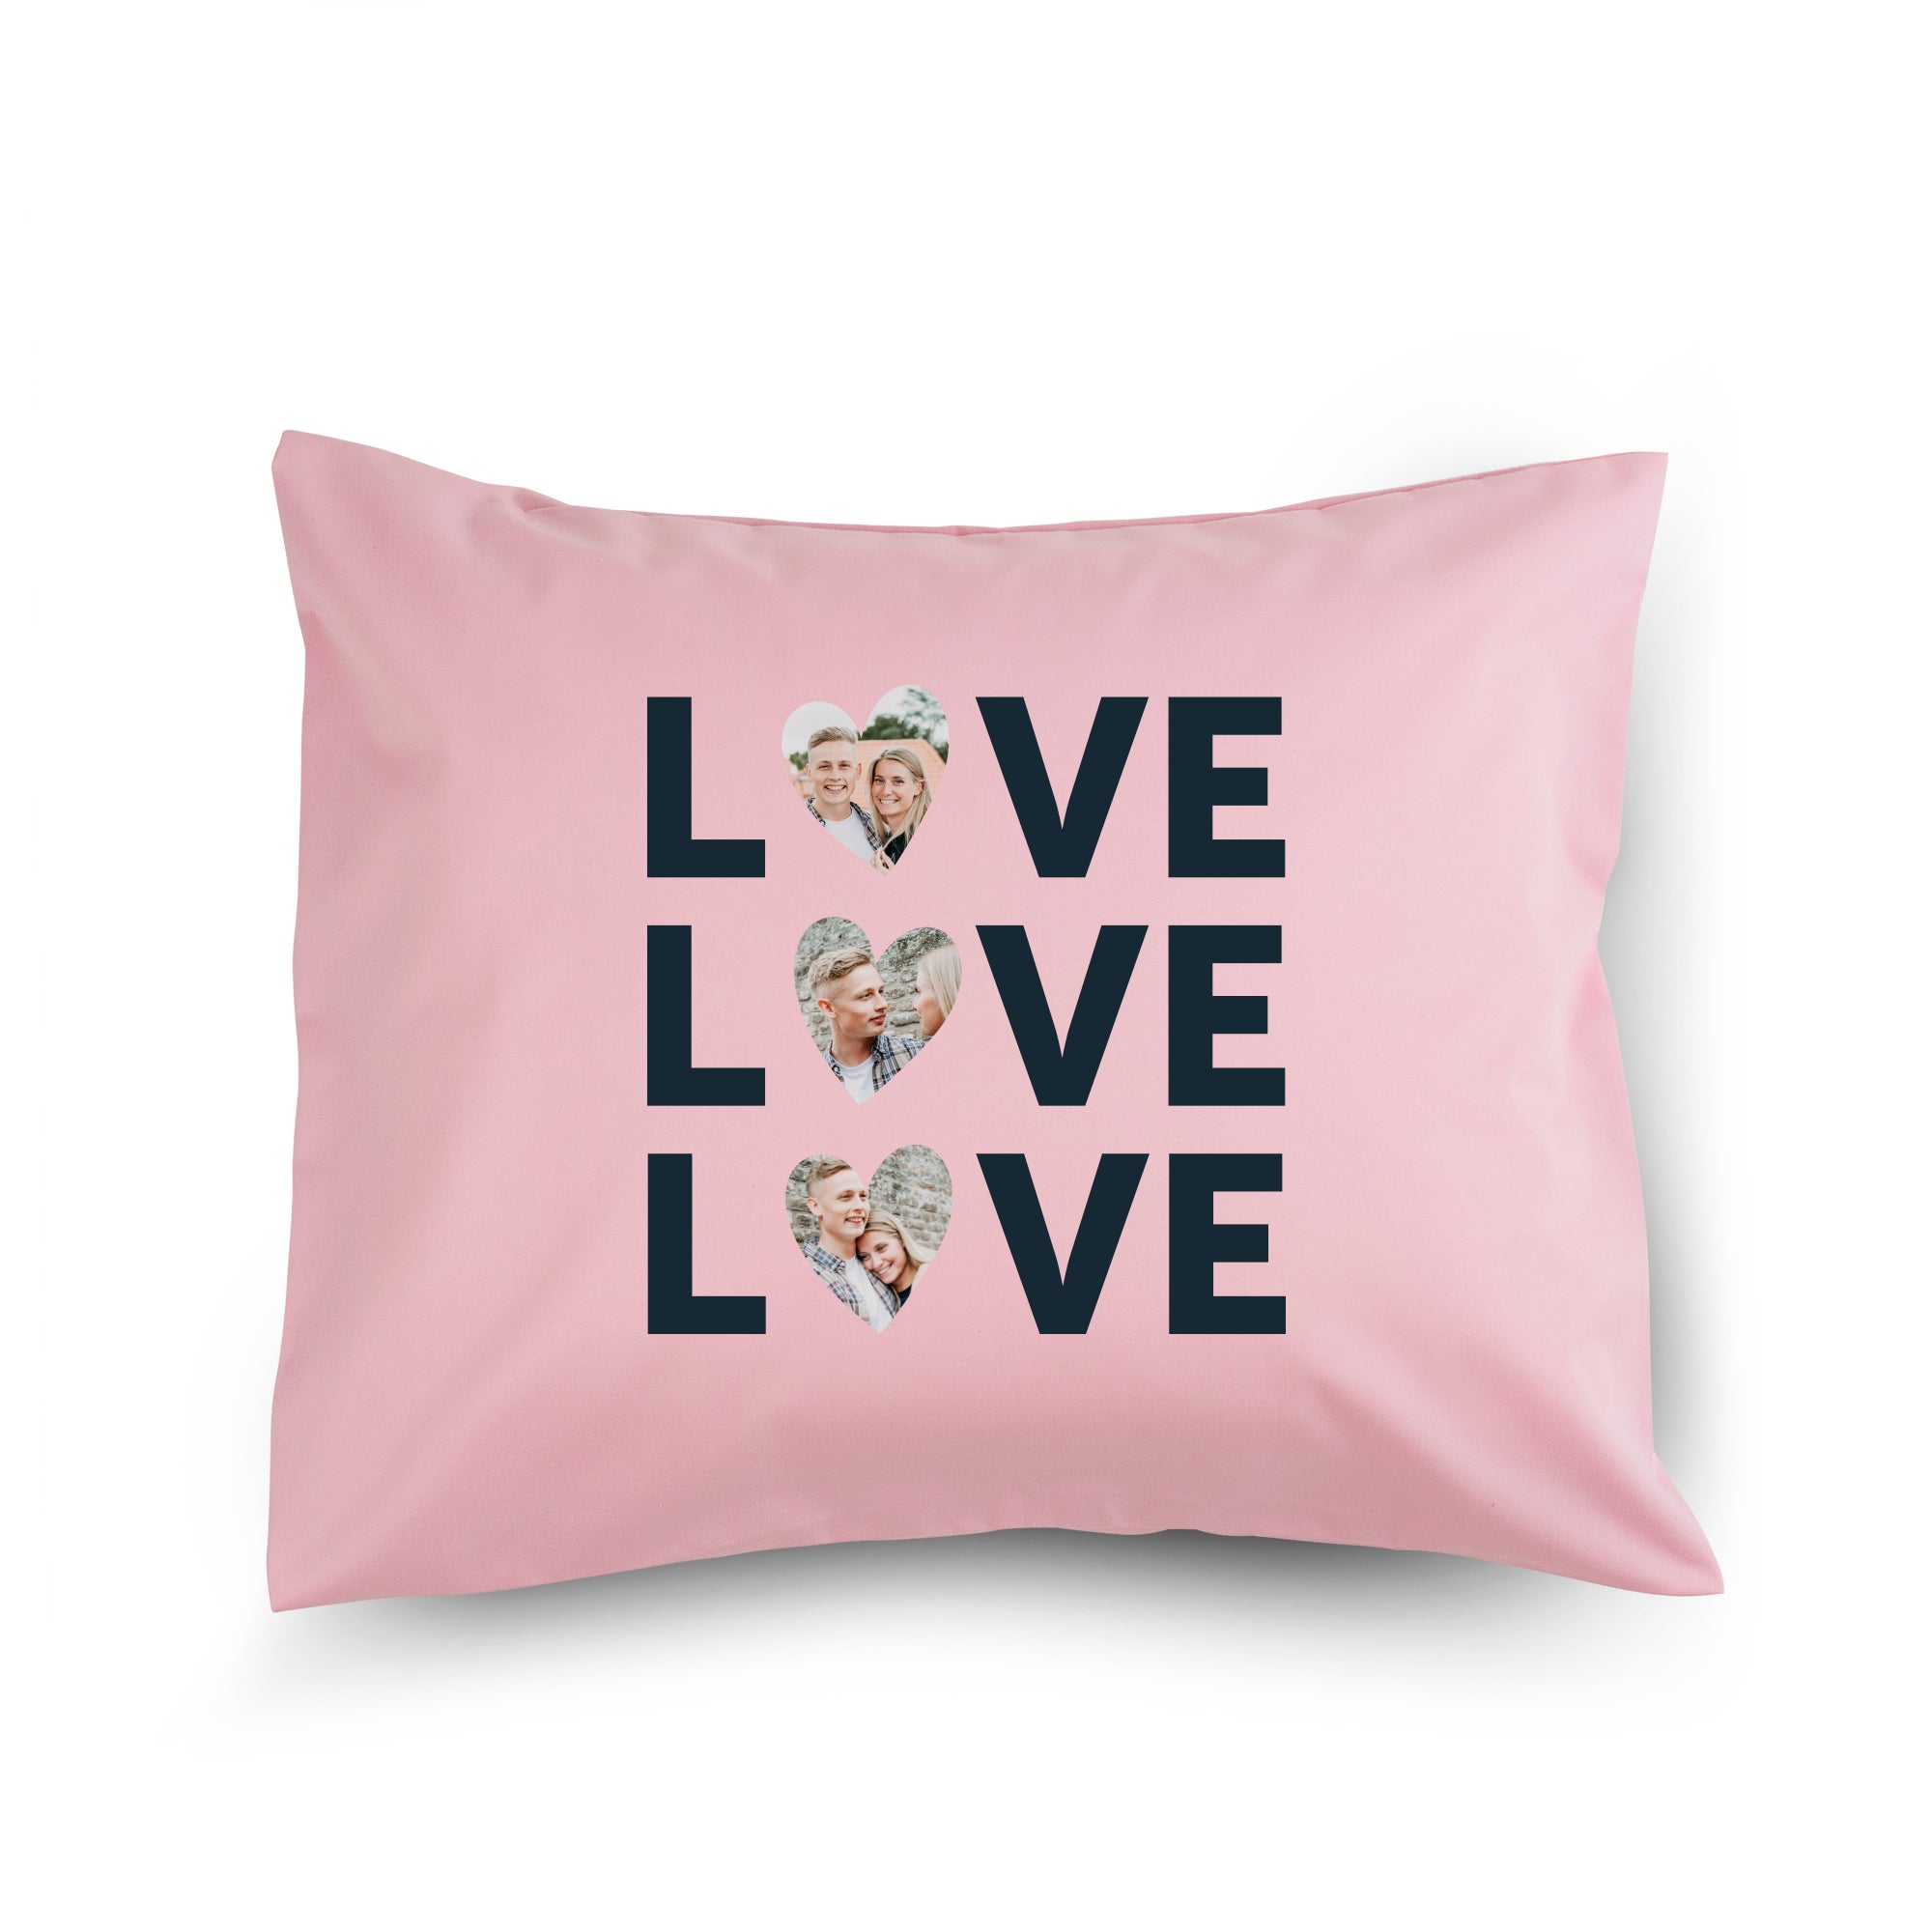 Personalised cushion - Pink - 50 x 60 cm